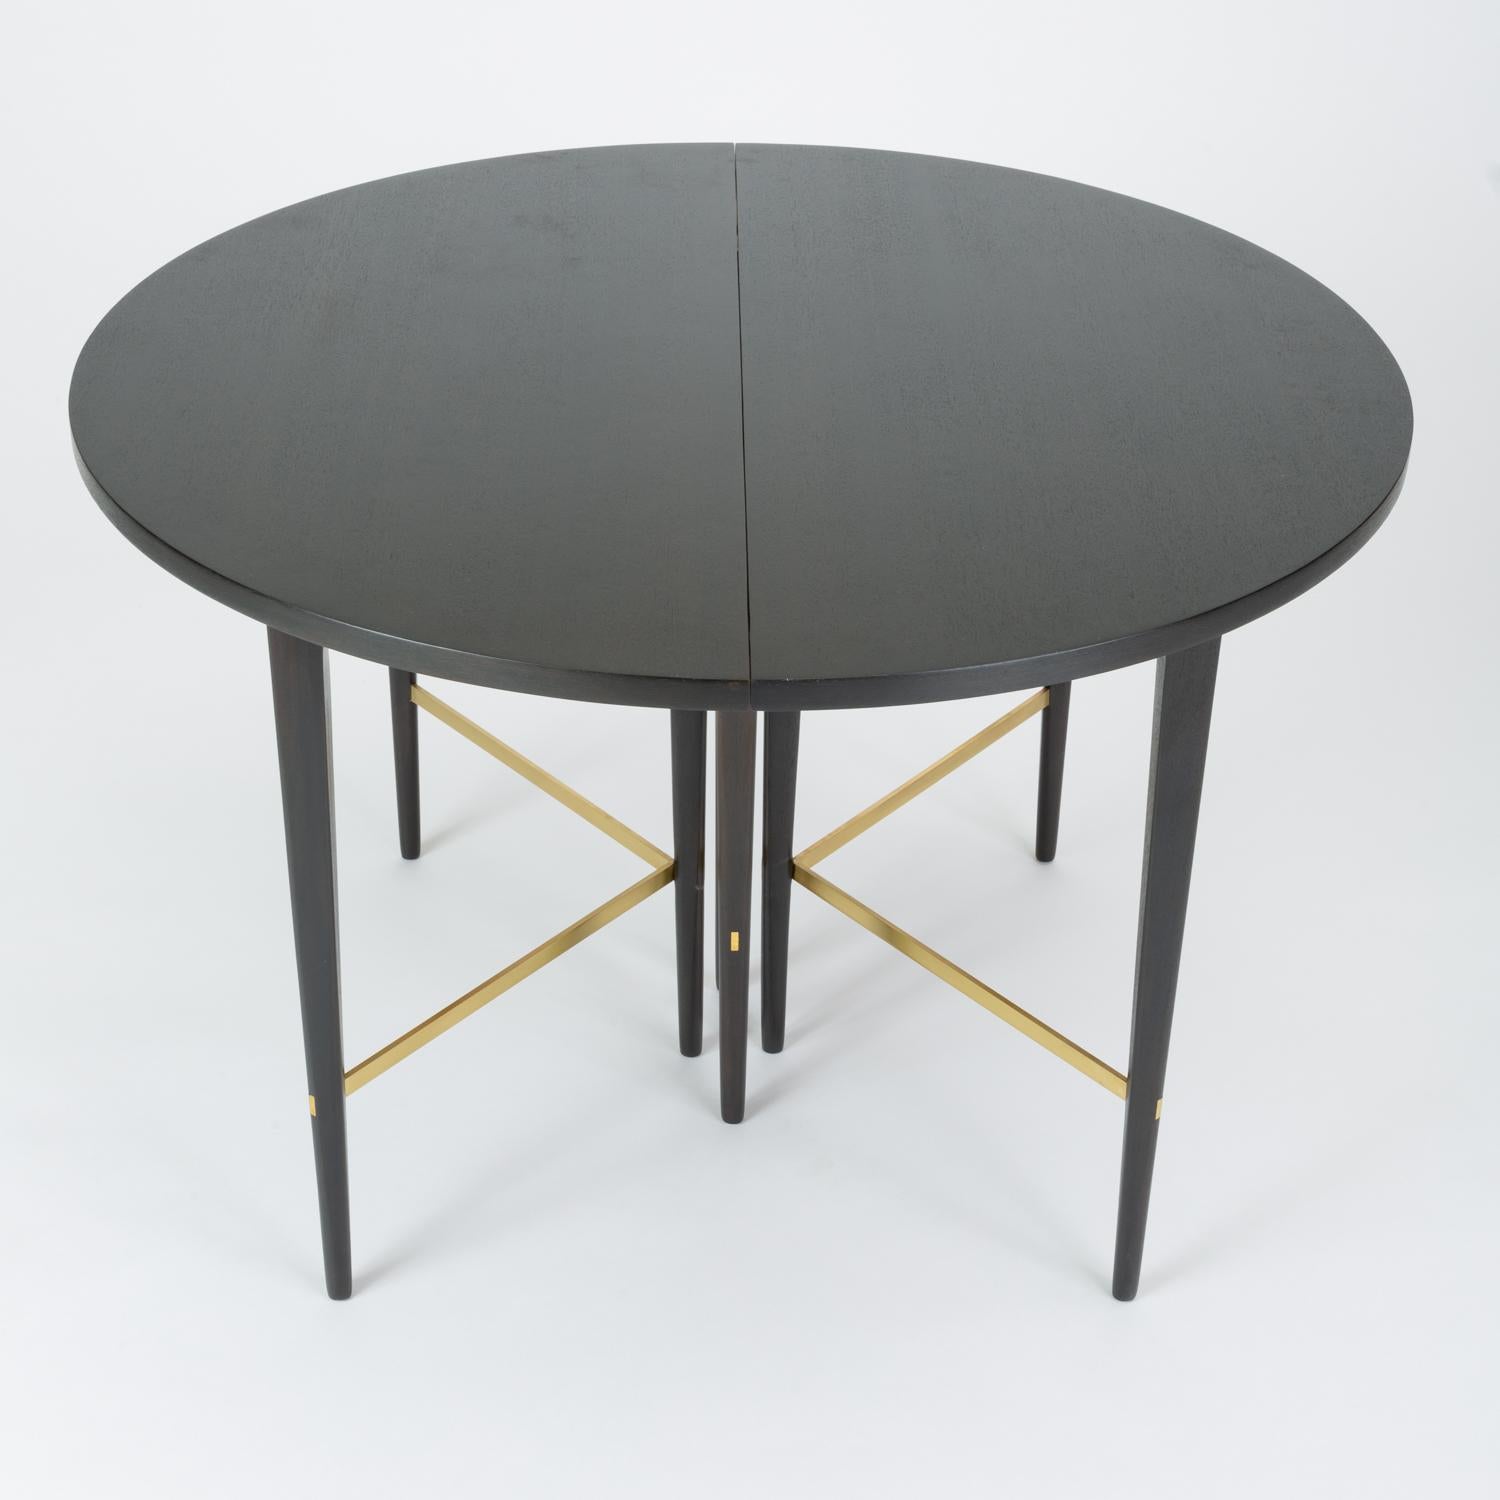 American Ebonized Dining Table with Six Leaves by Paul McCobb for Calvin Furniture